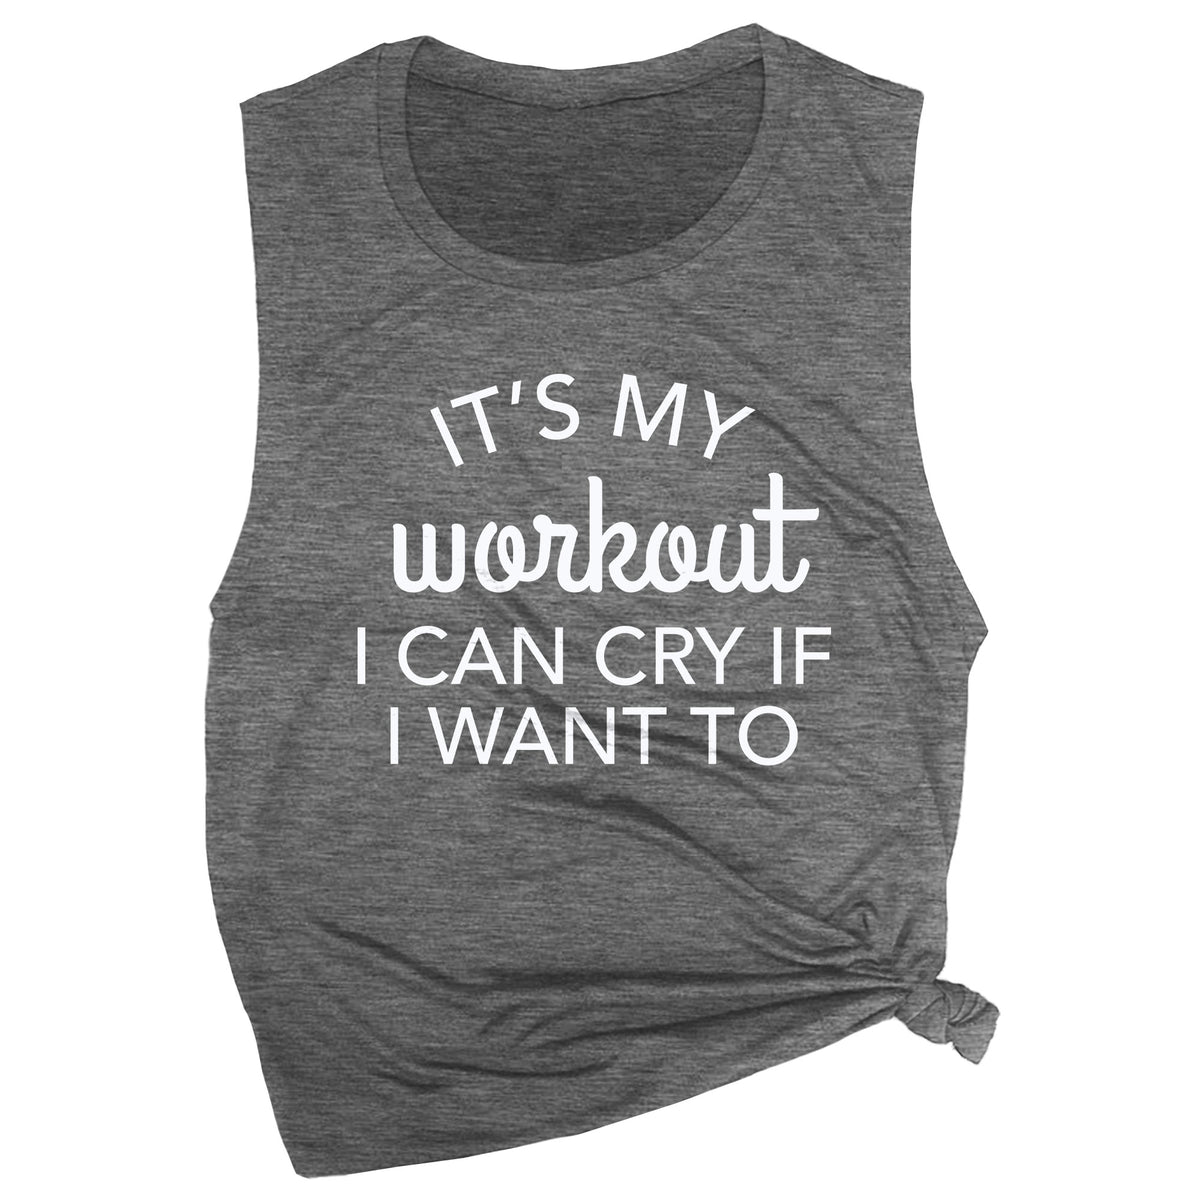 It's My Workout, I Can Cry If I Want To Muscle Tee